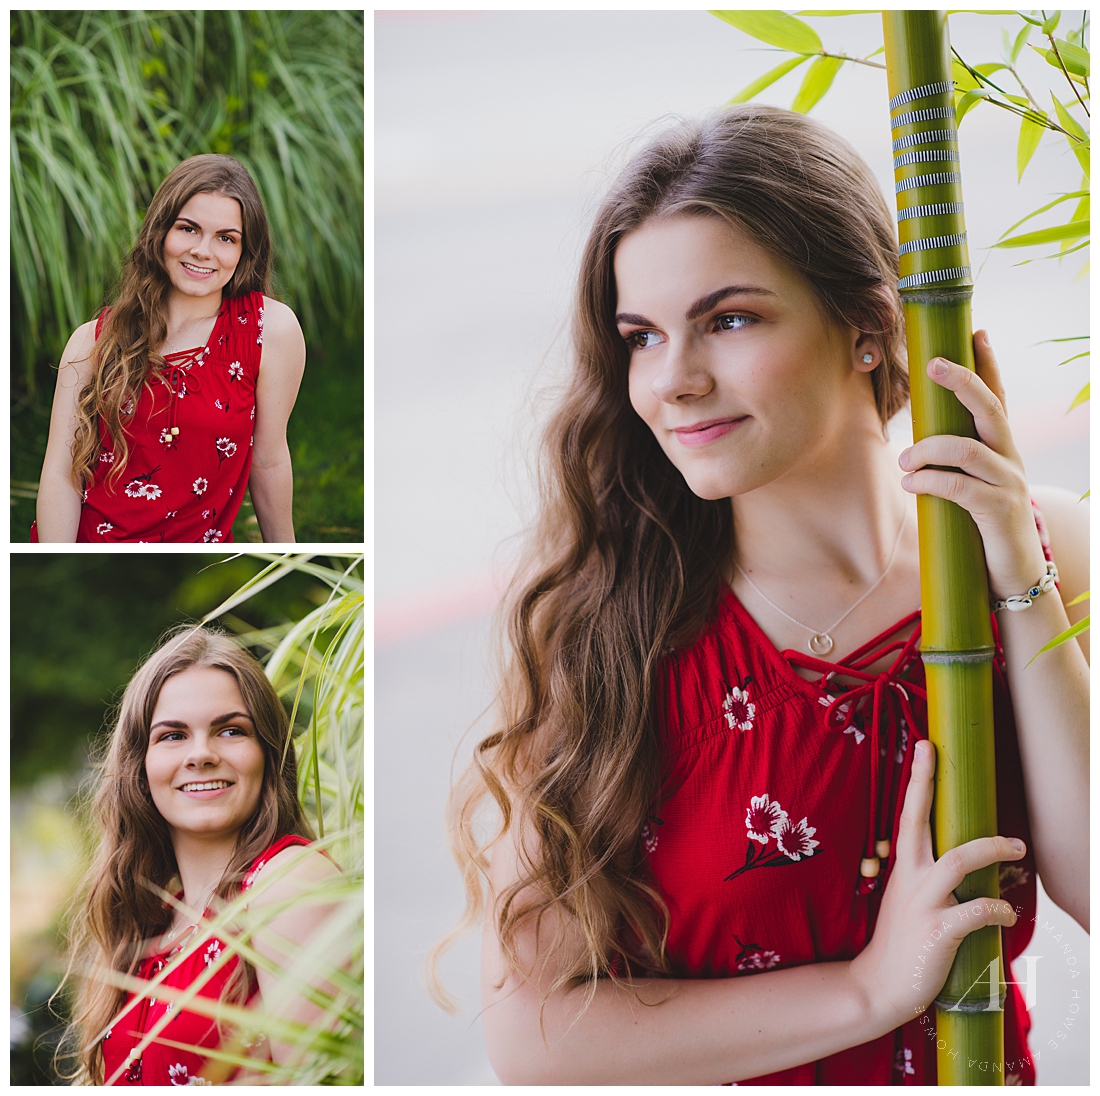 Outdoor Senior Portraits in Tacoma | Senior girl posing in a garden with stalks of bamboo and green grass, wearing a red floral blouse | Photographed by the Best Tacoma Senior Portrait Photographer Amanda Howse